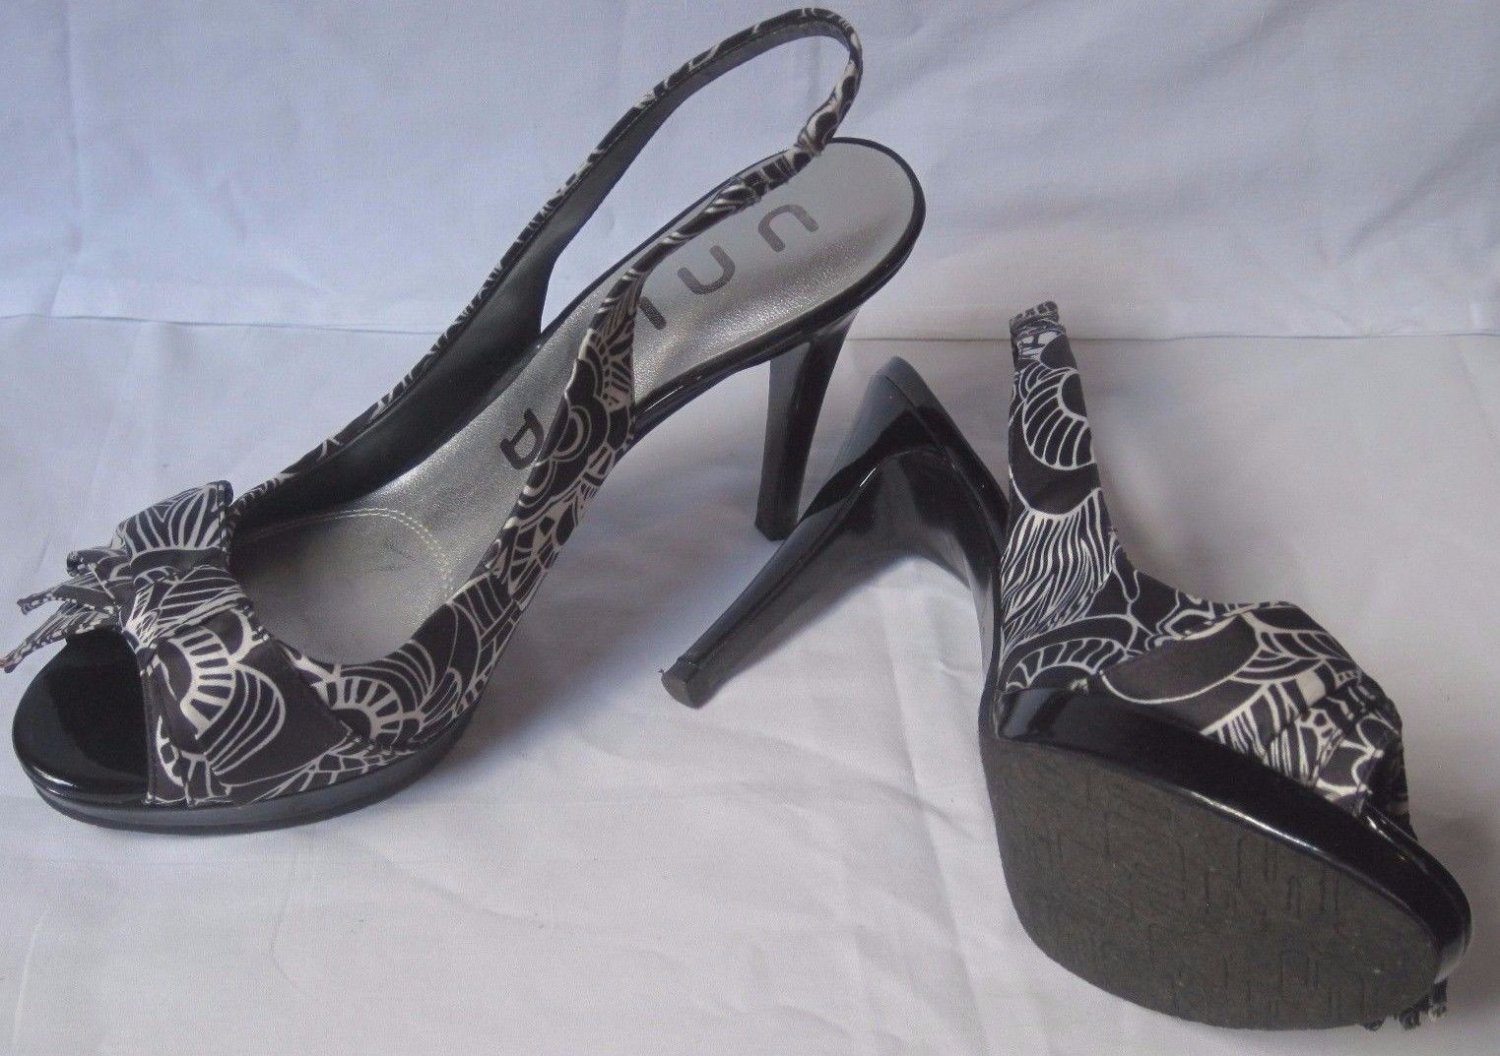 Unisa 8M Black and White Floral Print High Heel Shoes